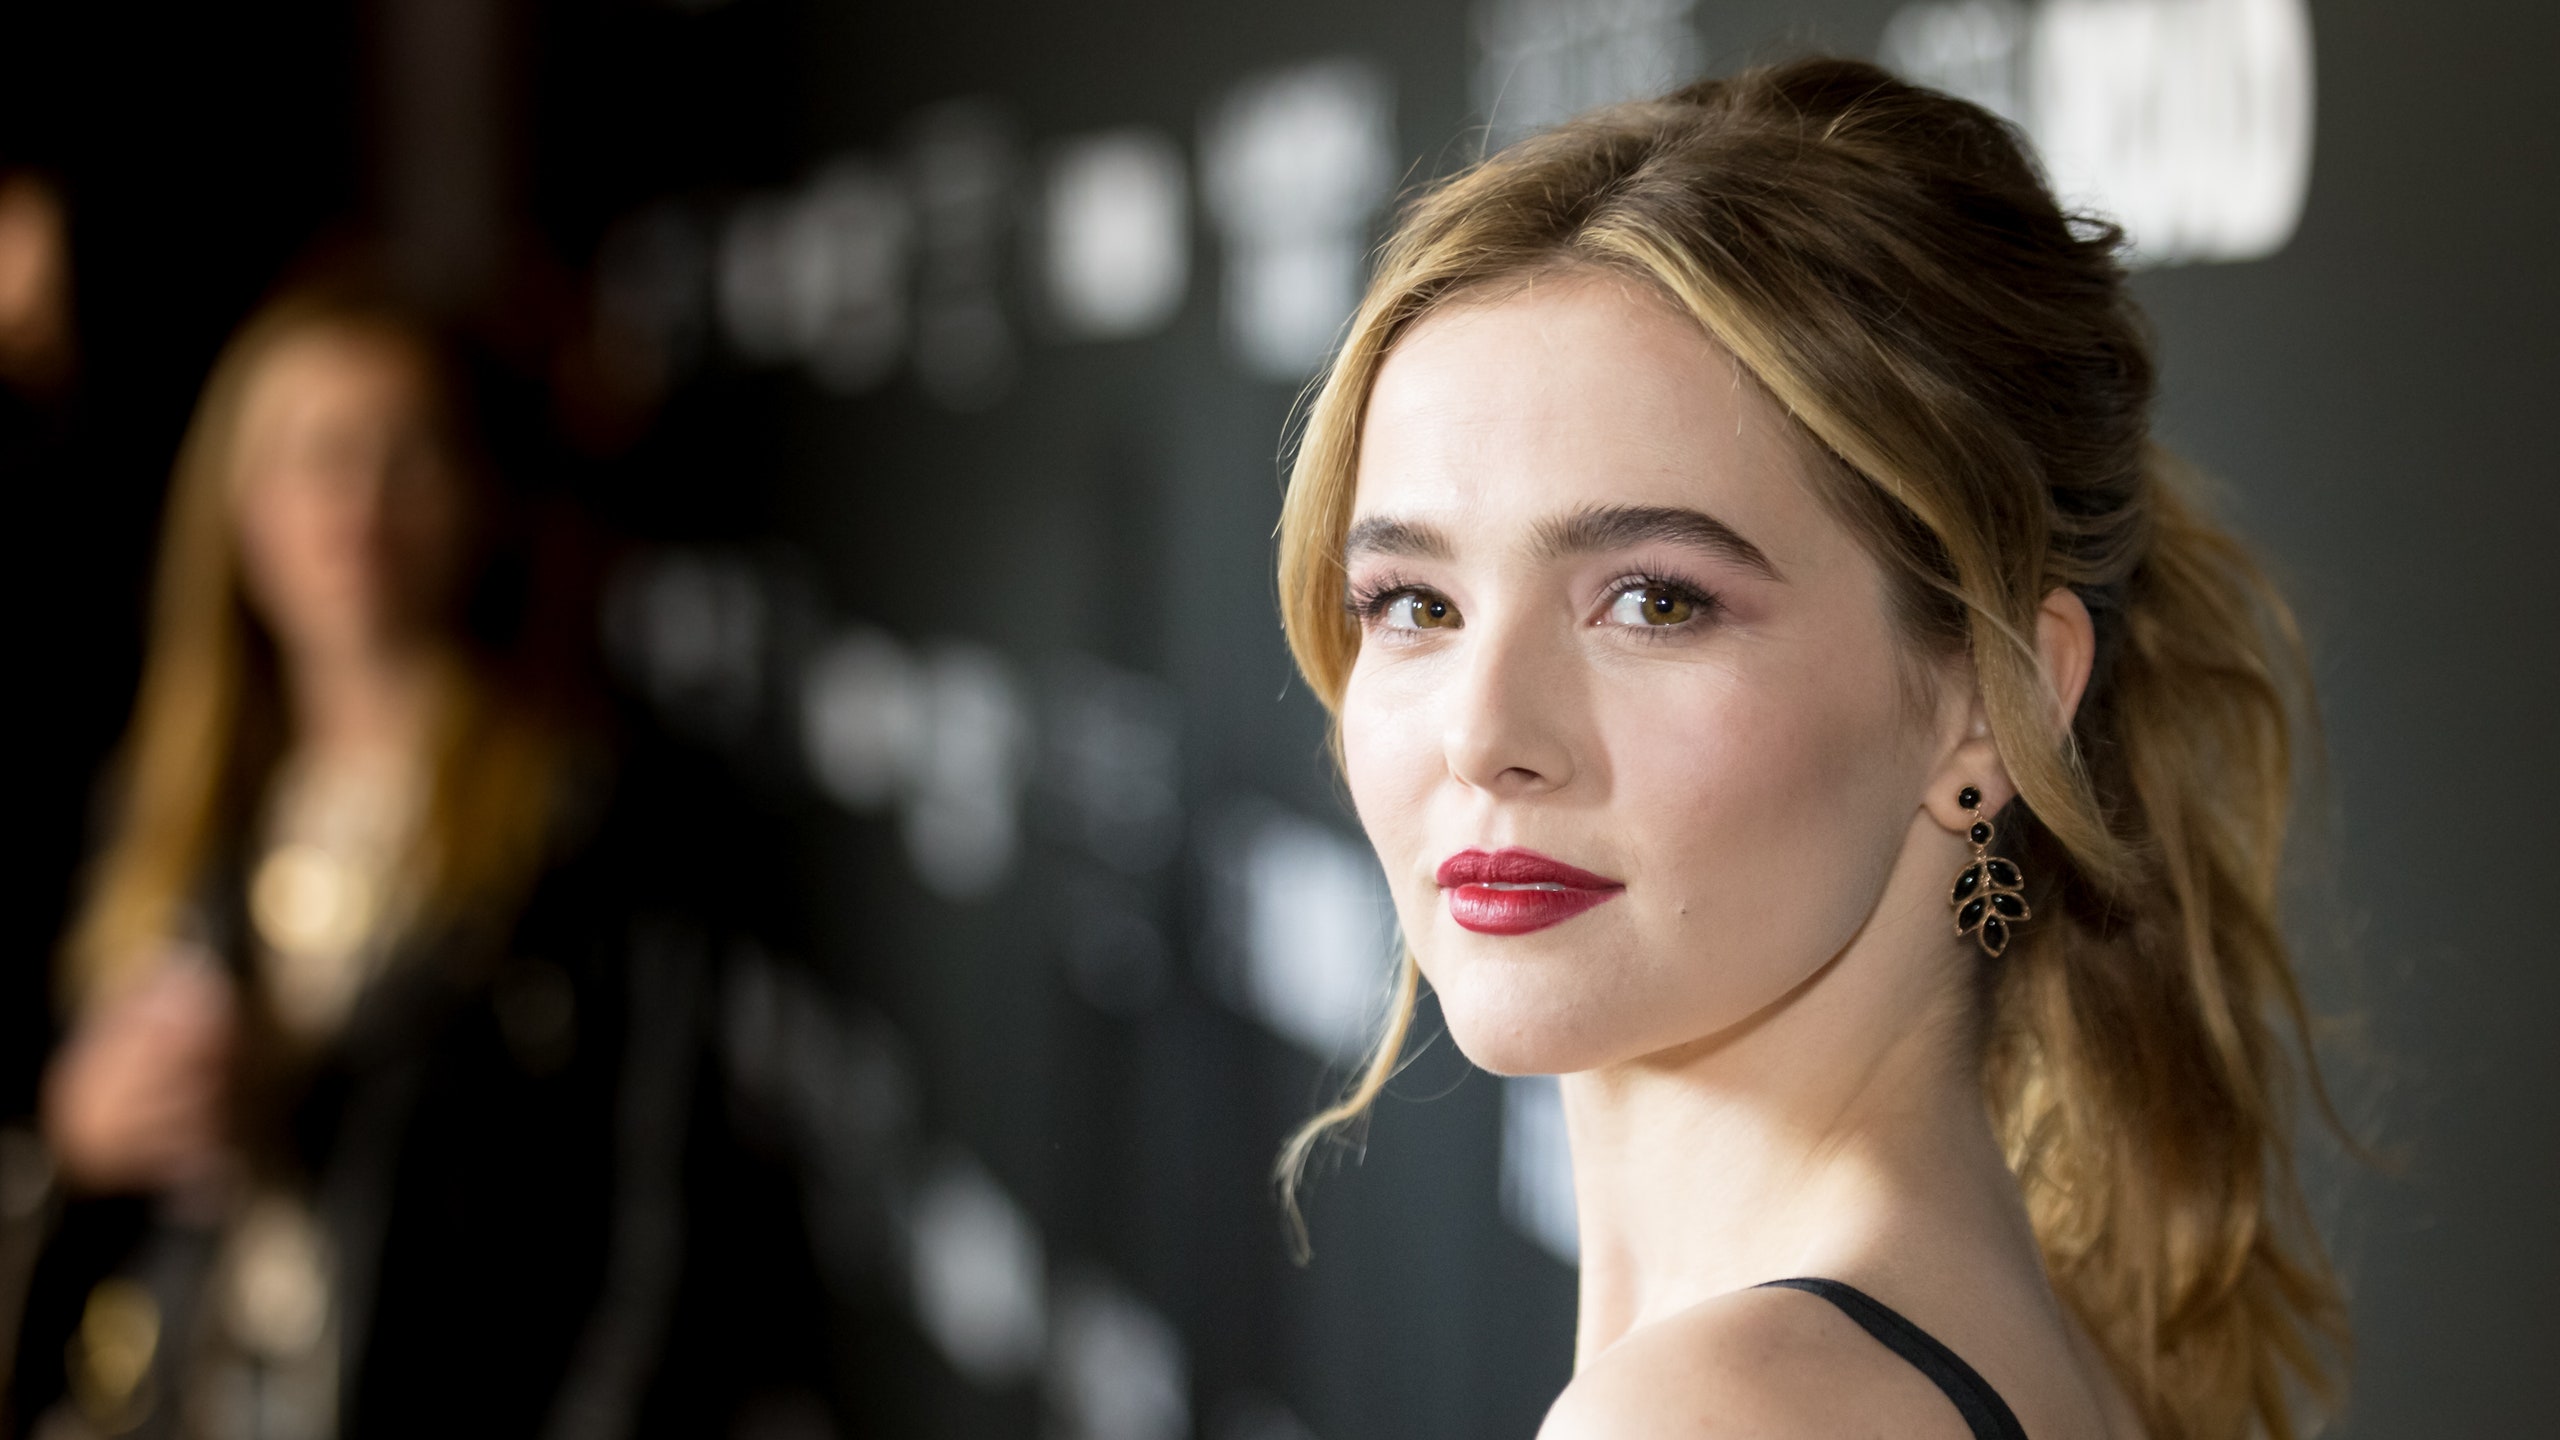 Zoey Deutch on Celebrity Activism and Her New Film 'Before I Fall'